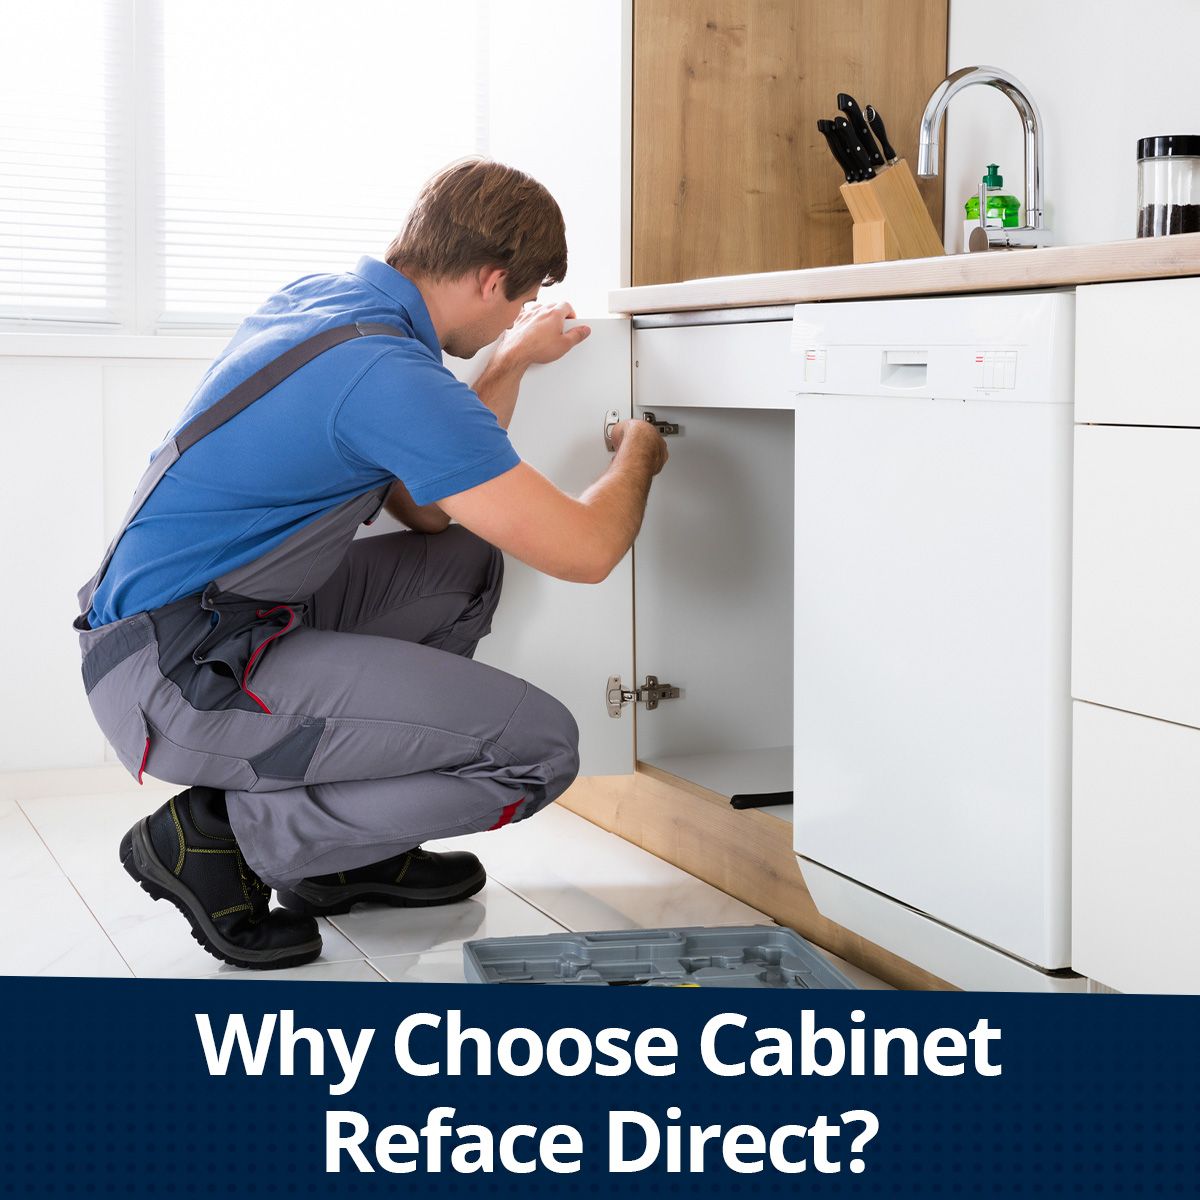 Why Choose Cabinet Reface Direct?